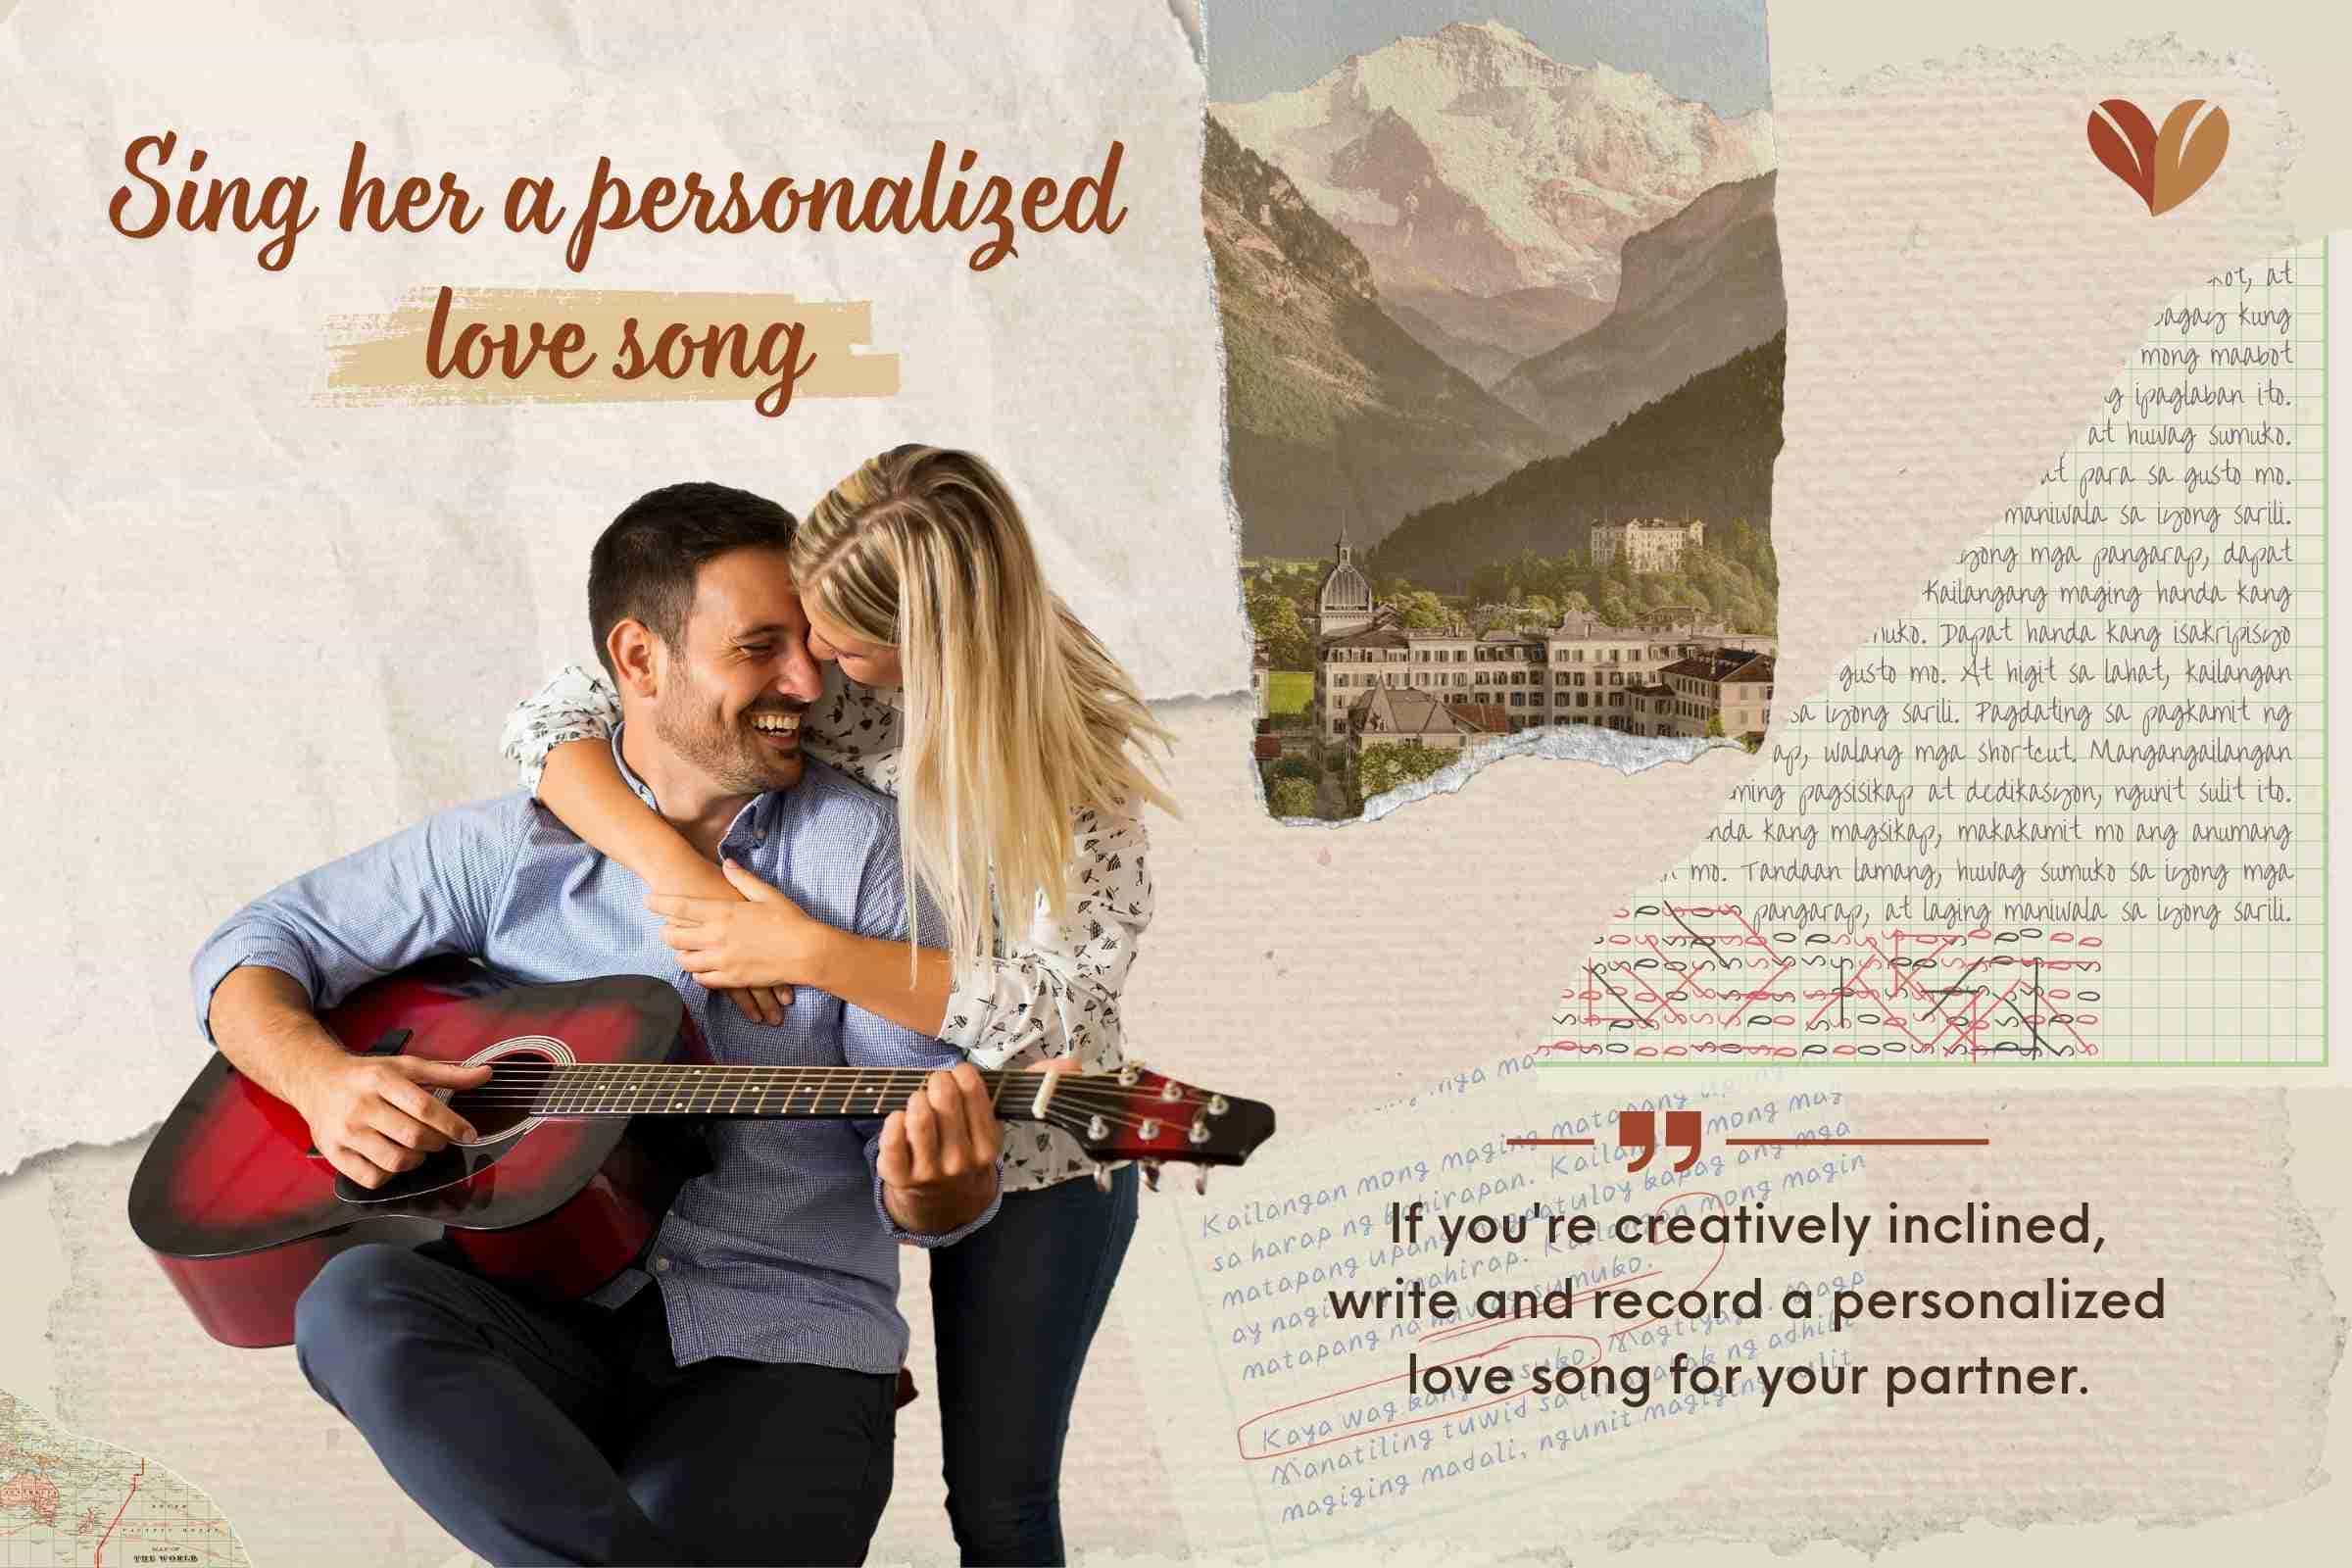 If you're creatively inclined, write and record a personalized love song for your partner.